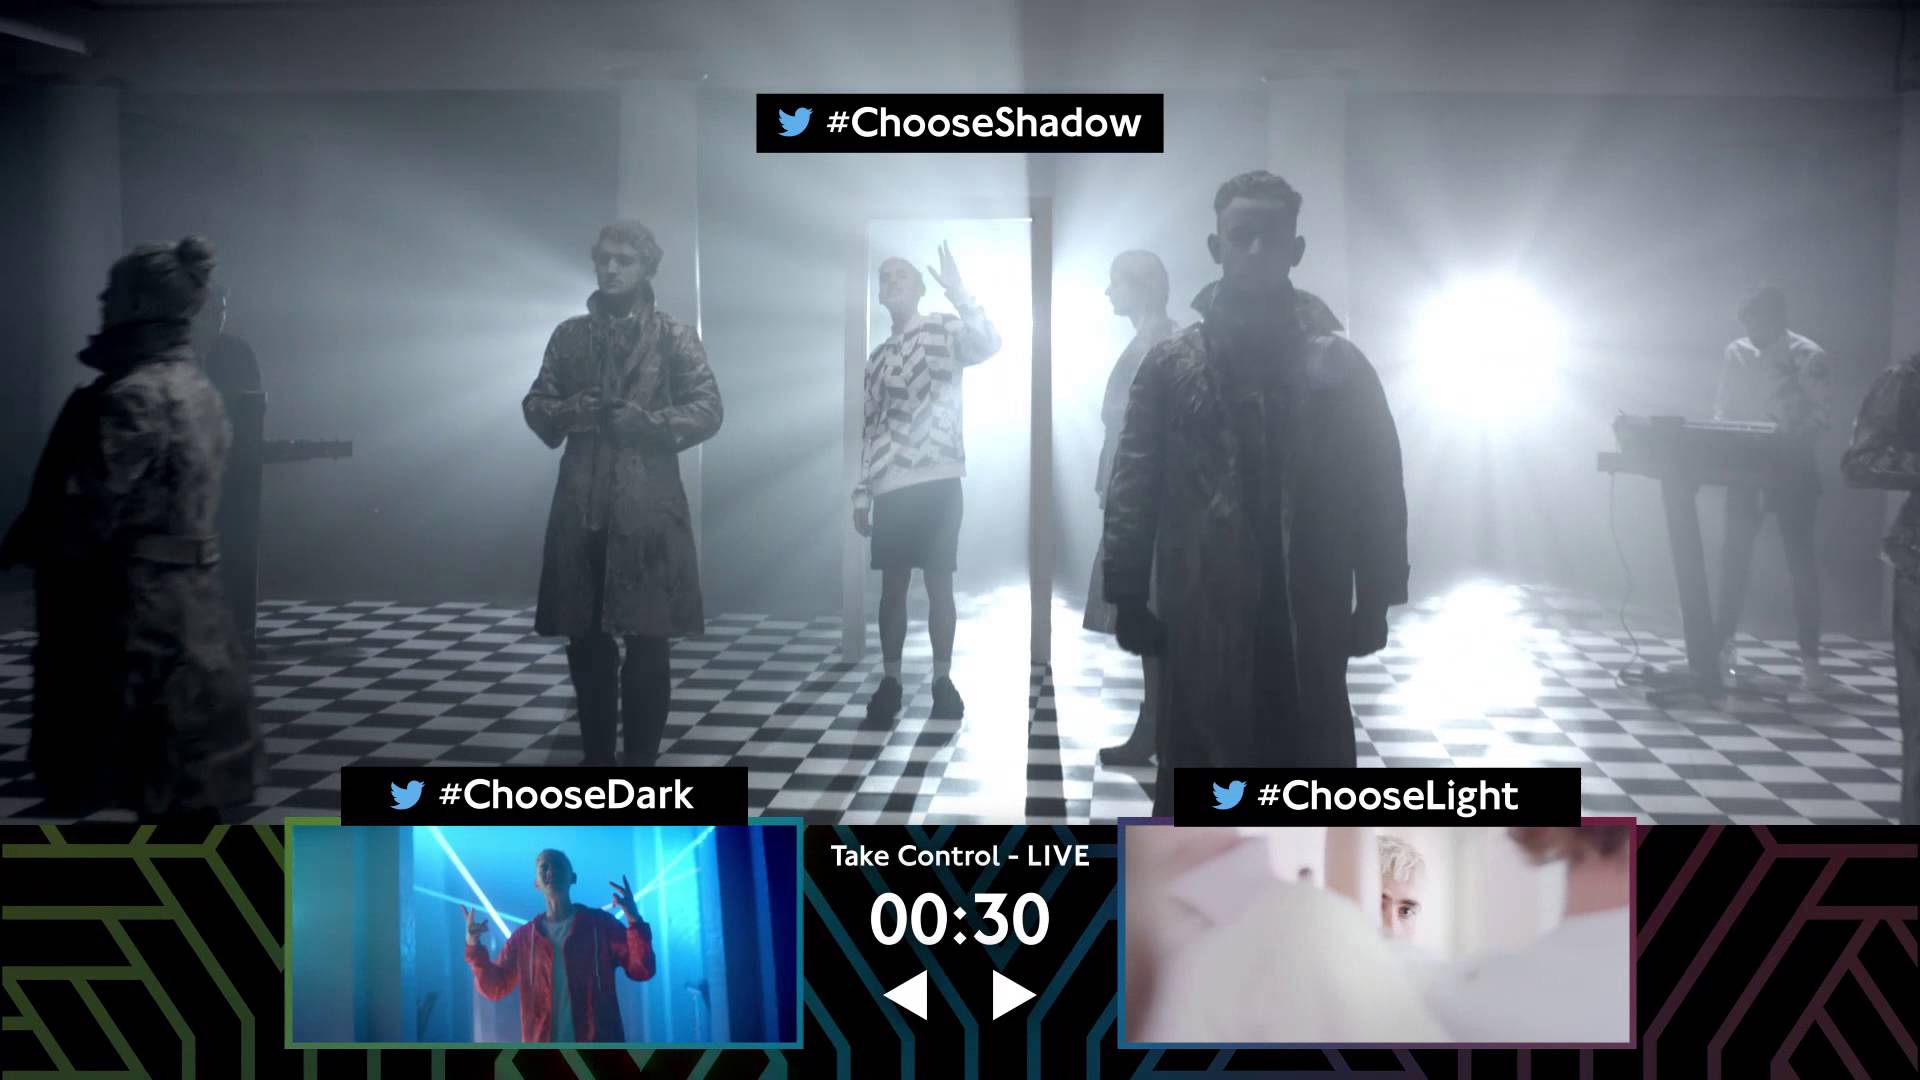 Years and Years Shine Take Control Advert in action showing hashtags